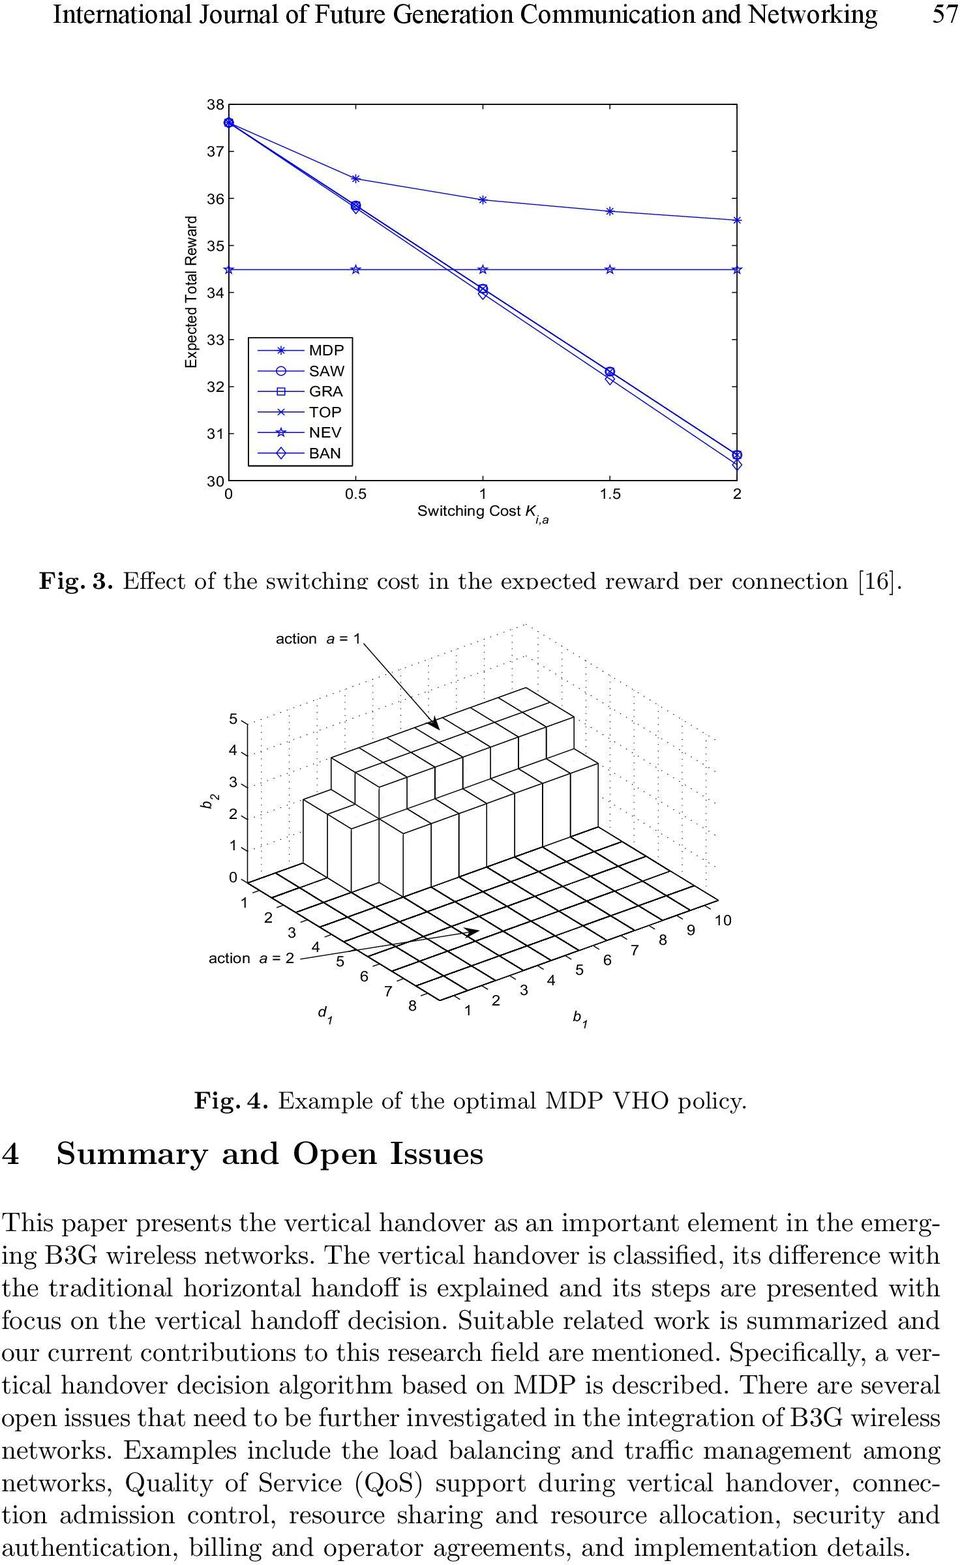 action a = 1 5 4 3 b 2 2 1 0 1 2 3 4 action a = 2 5 d 1 6 7 8 1 2 3 4 5 b 1 6 7 8 9 10 Fig.4. Example of the optimal MDP VHO policy.